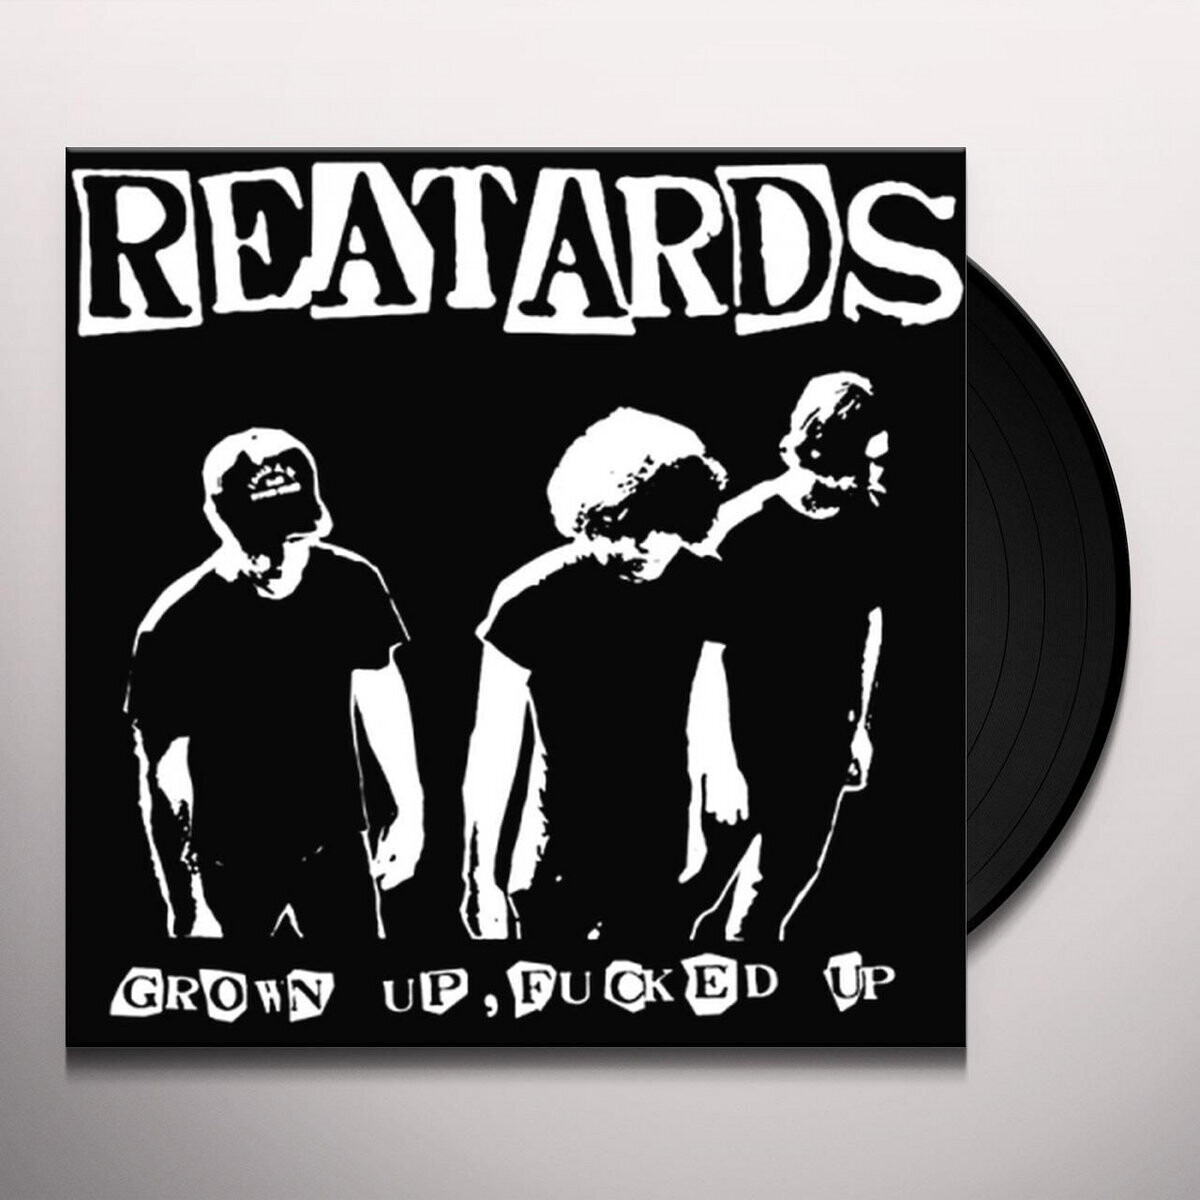 Reatards "Grown Up, Fucked Up"